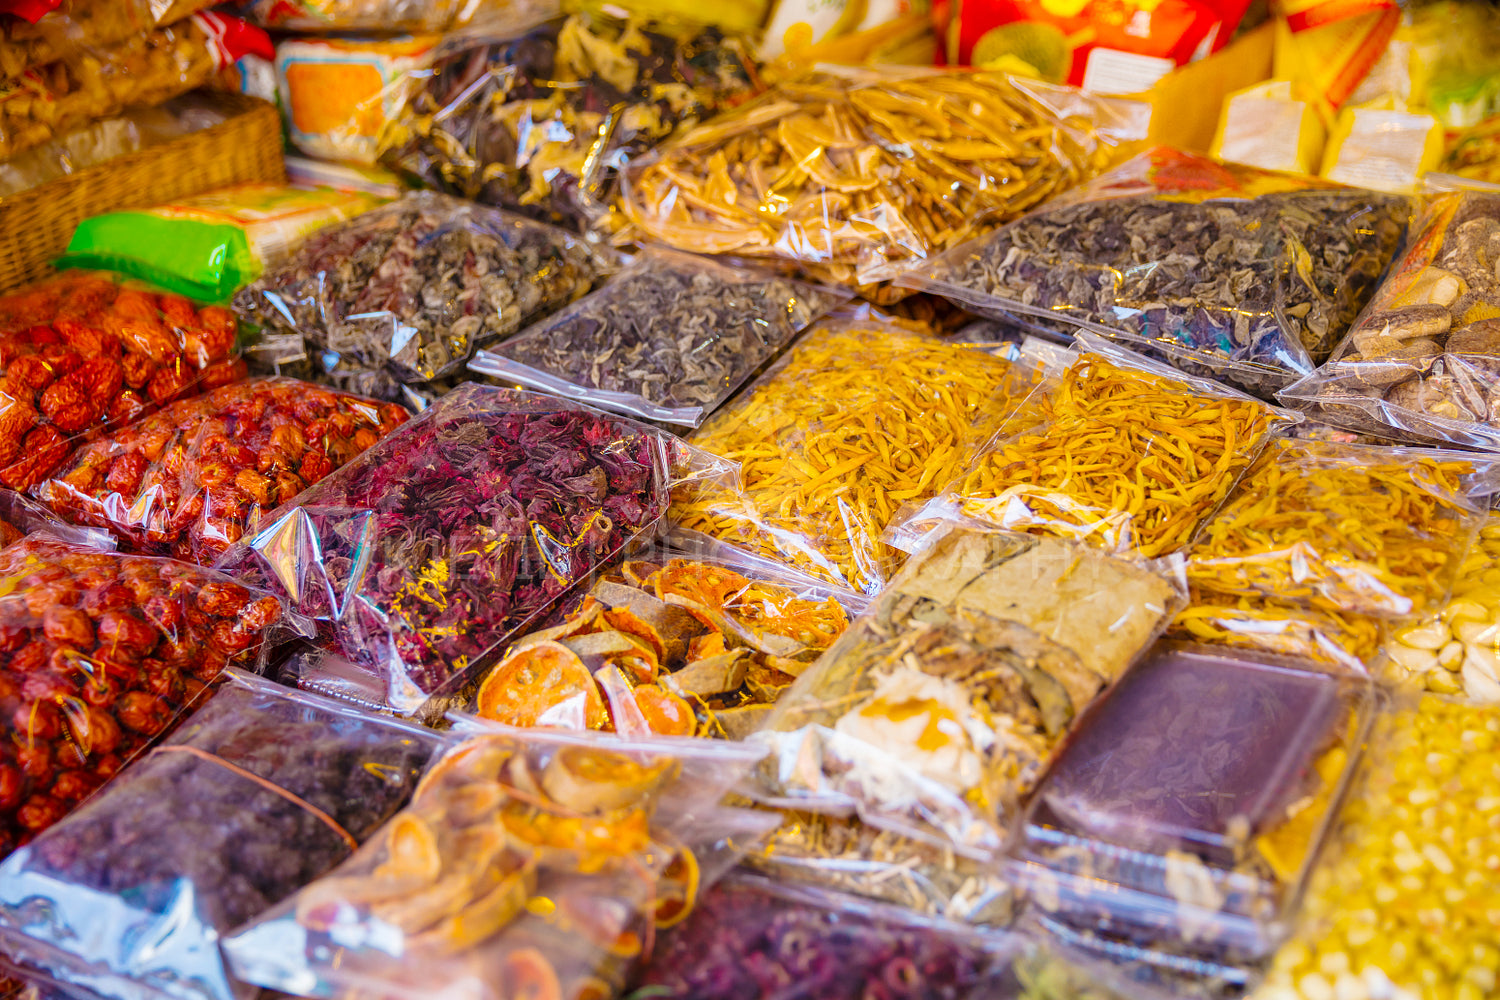 Various Packed Dried Food For Sale At Local Market